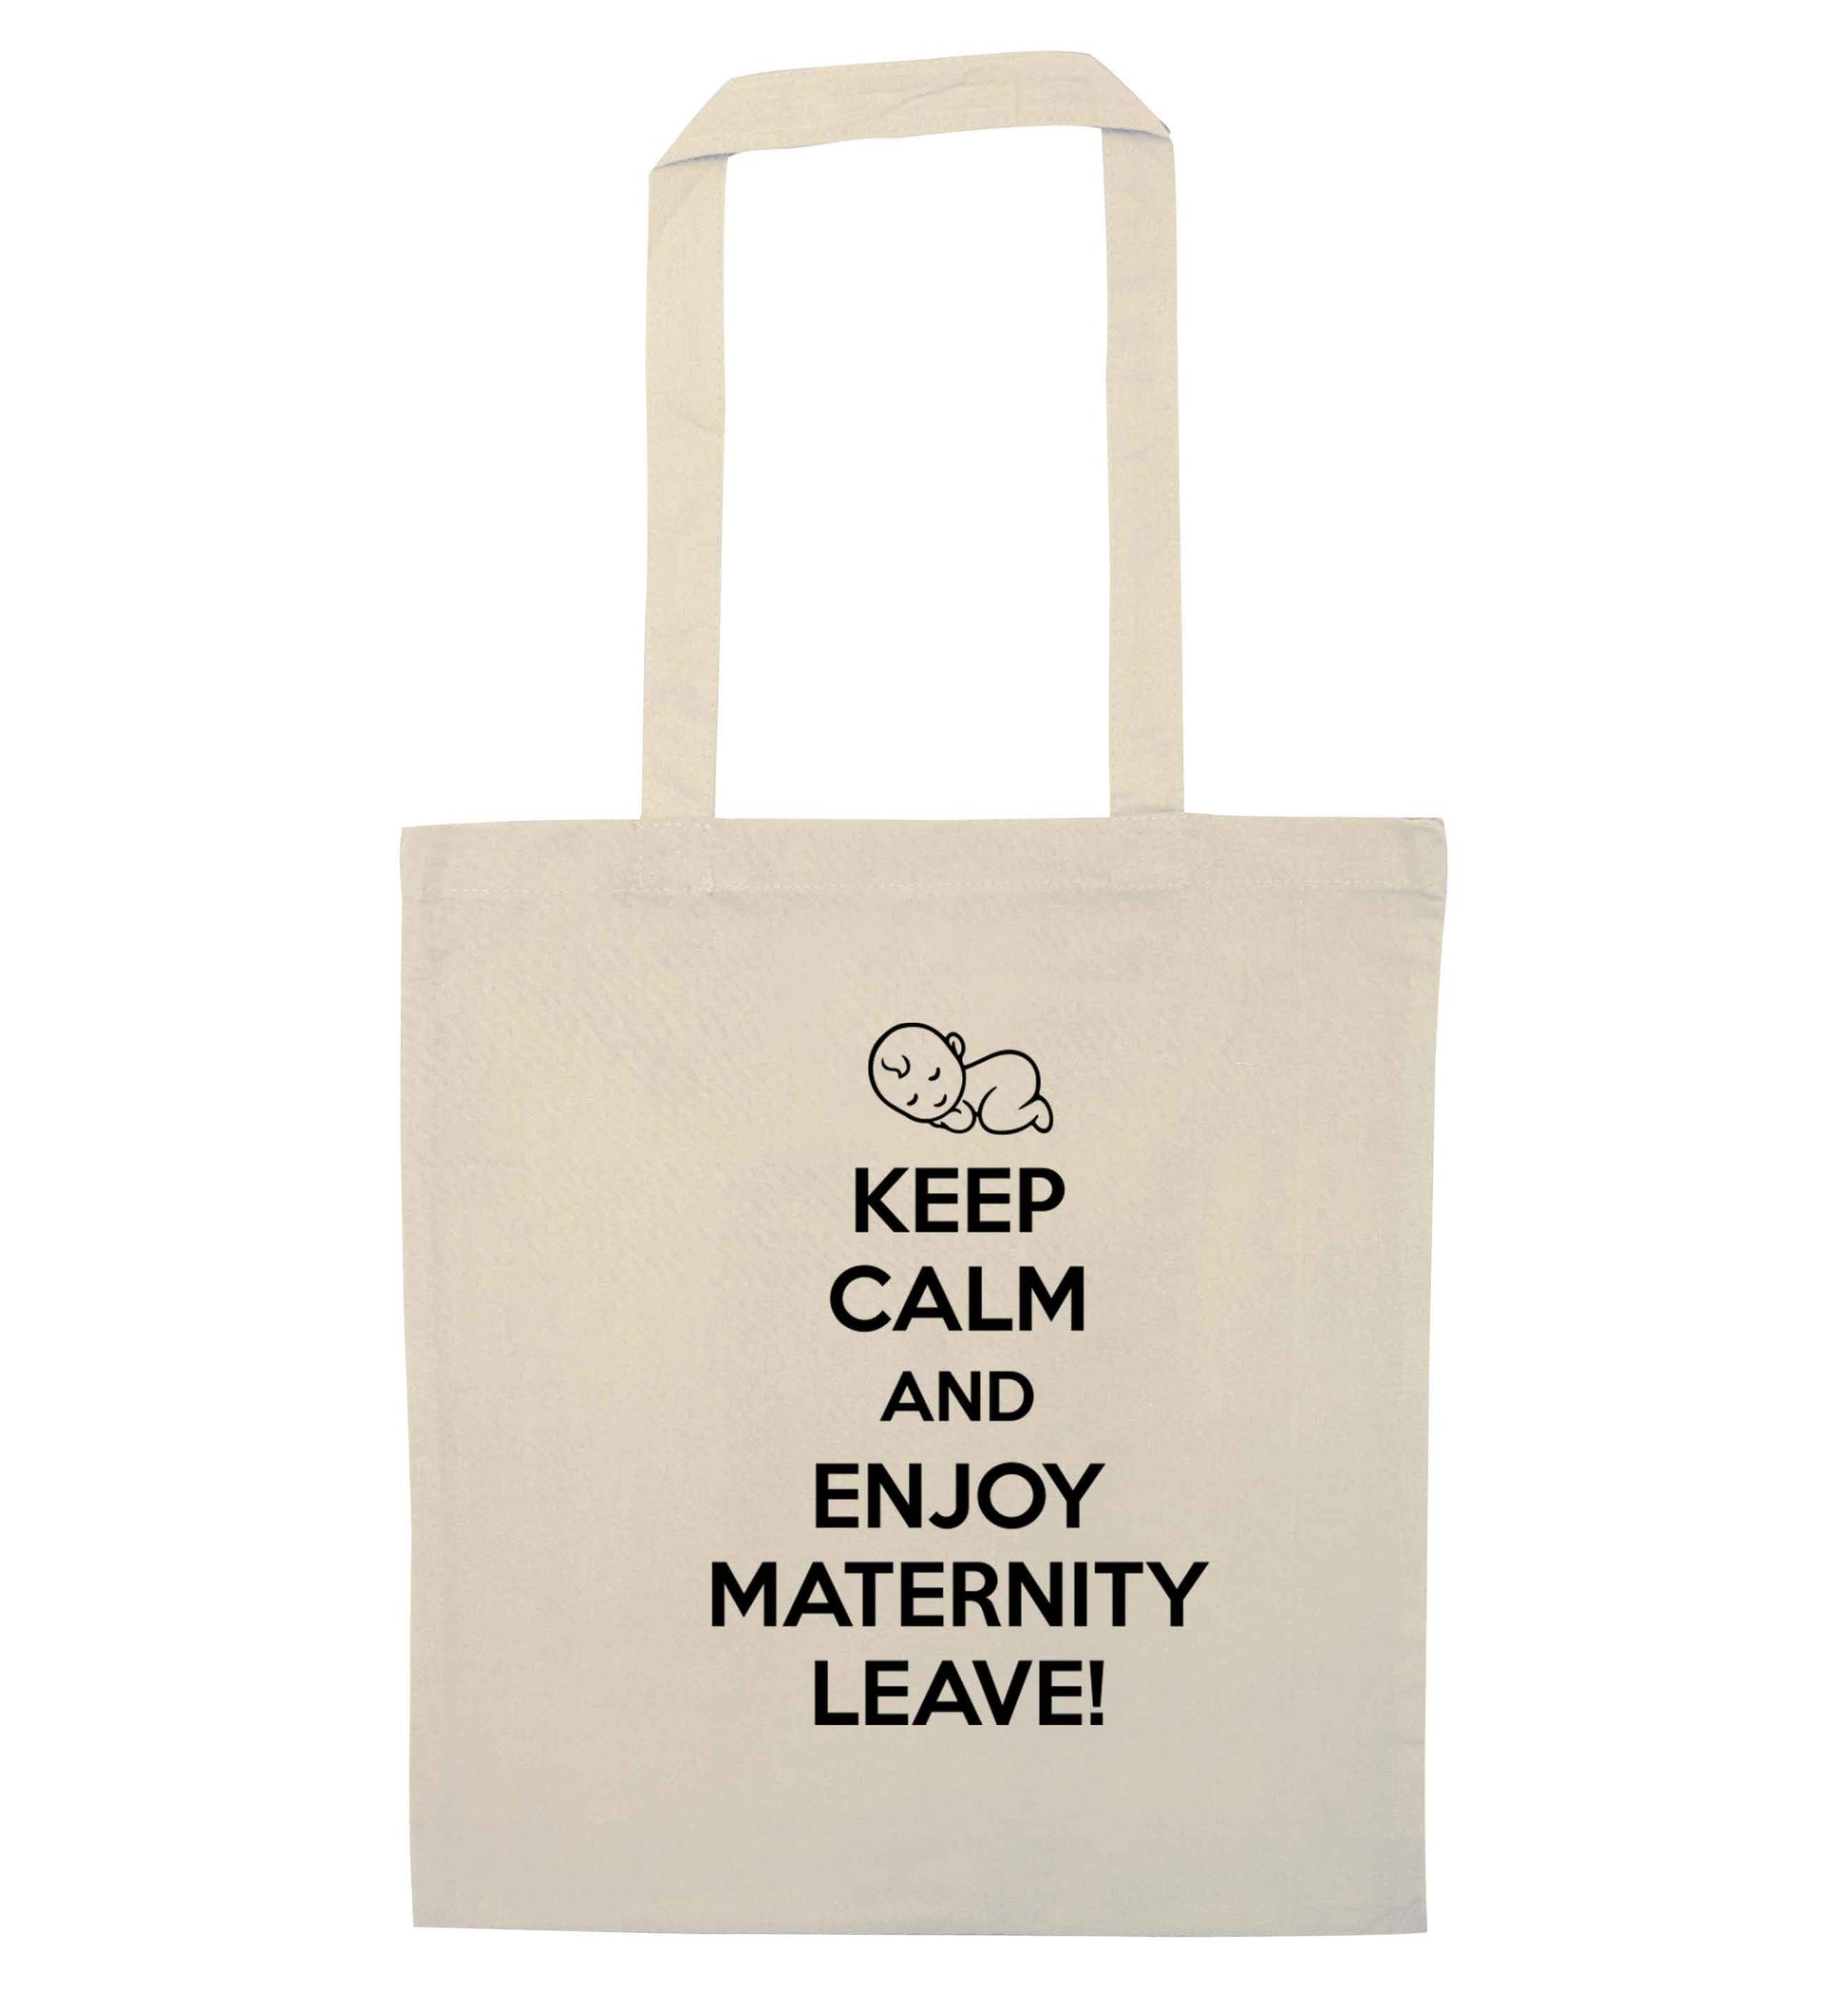 Keep calm and enjoy maternity leave natural tote bag